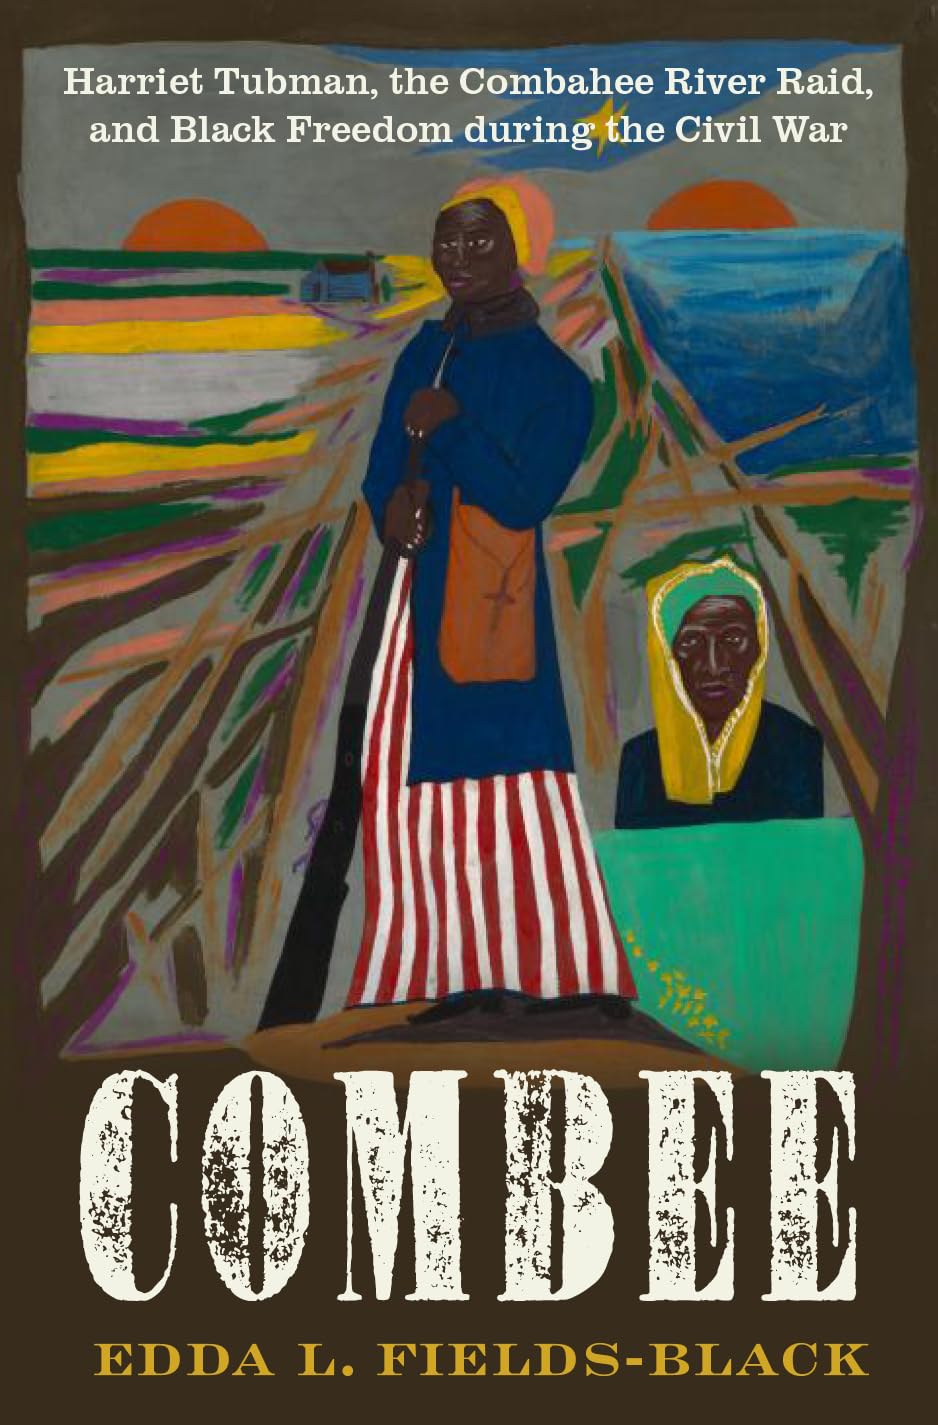 COMBEE: Harriet Tubman, the Combahee River Raid, and Black Freedom during the Civil War